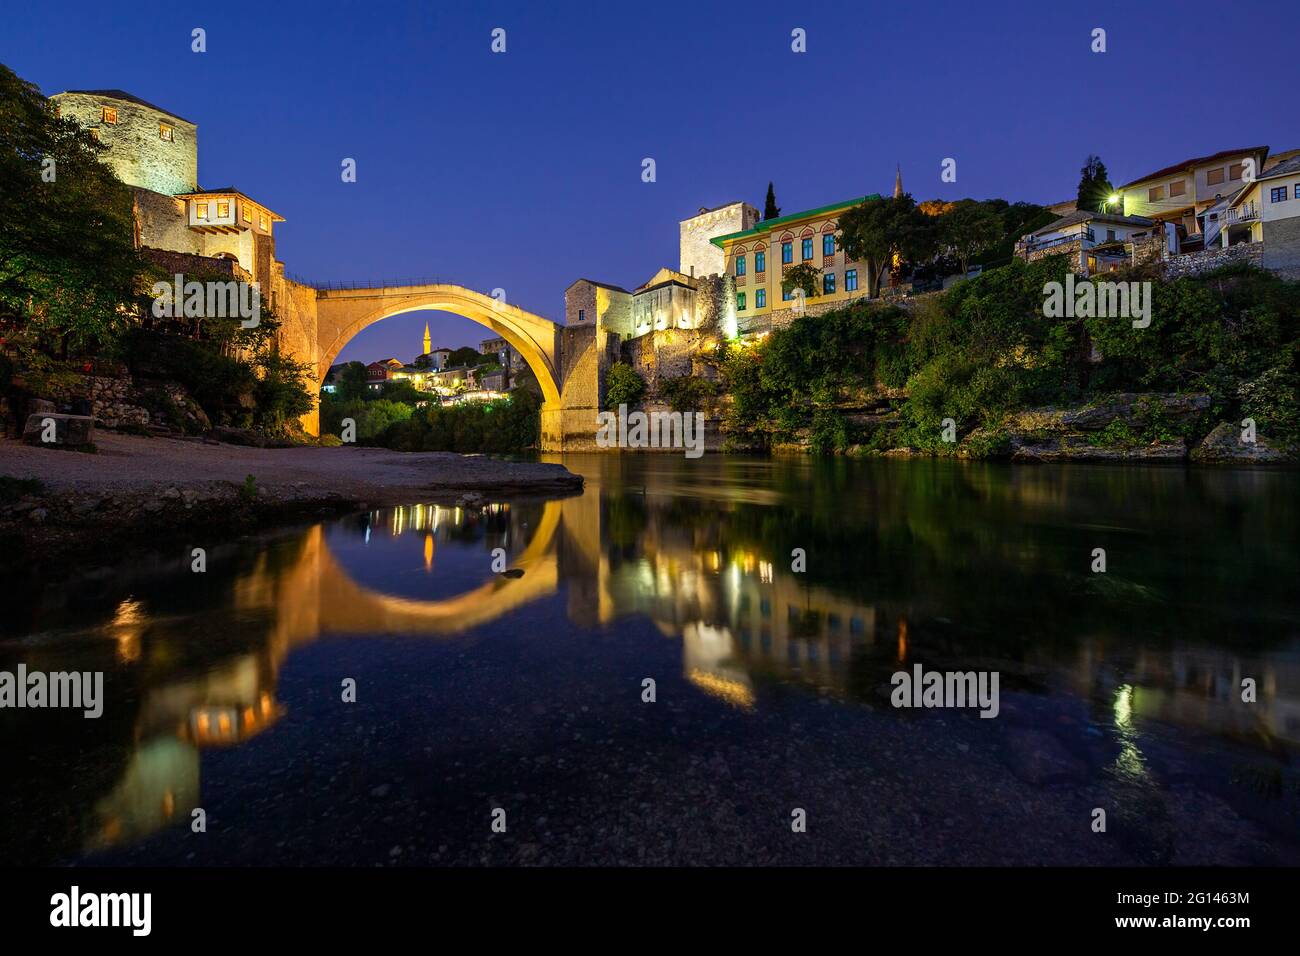 Historical Mostar Bridge known also as Stari Most or Old Bridge in Mostar, Bosnia and Herzegovina Stock Photo